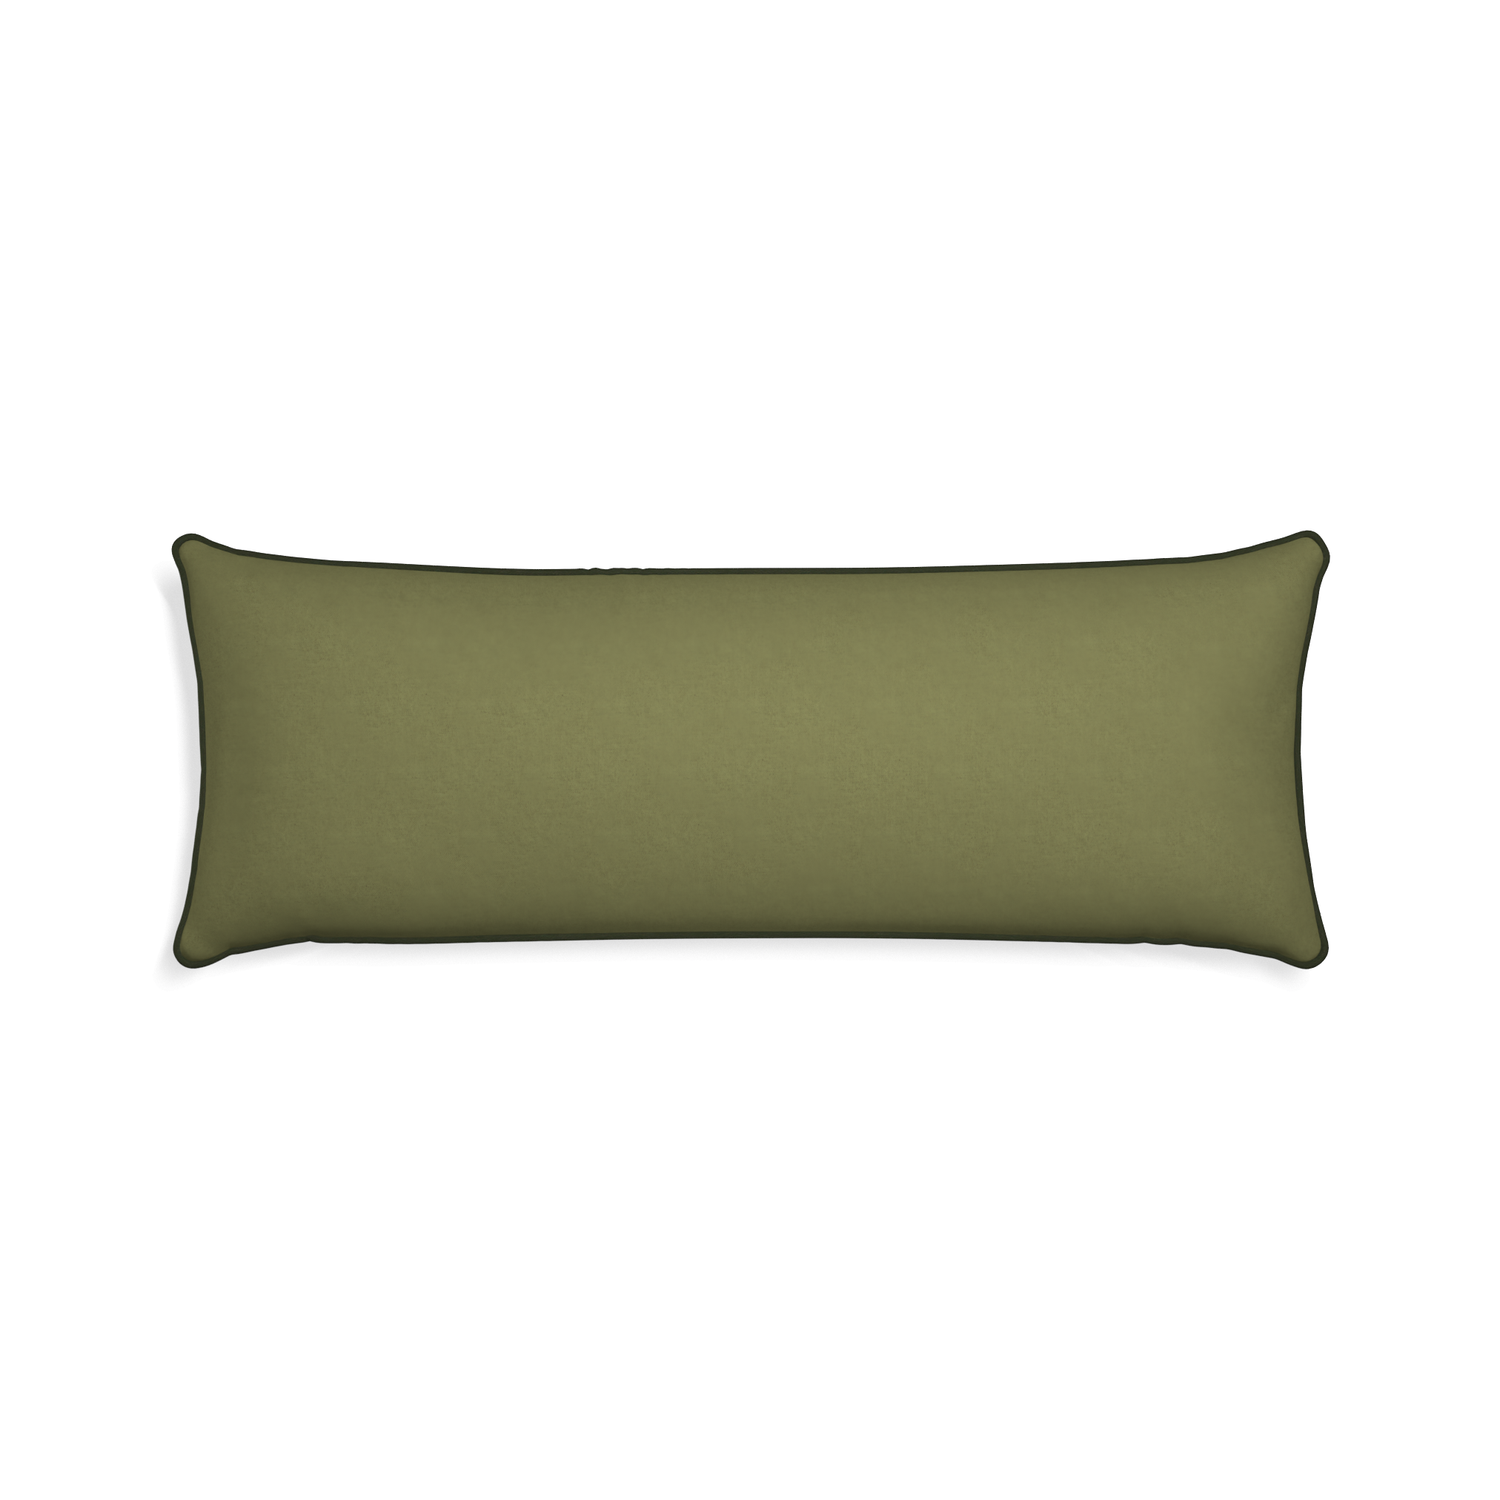 Xl-lumbar moss custom moss greenpillow with f piping on white background